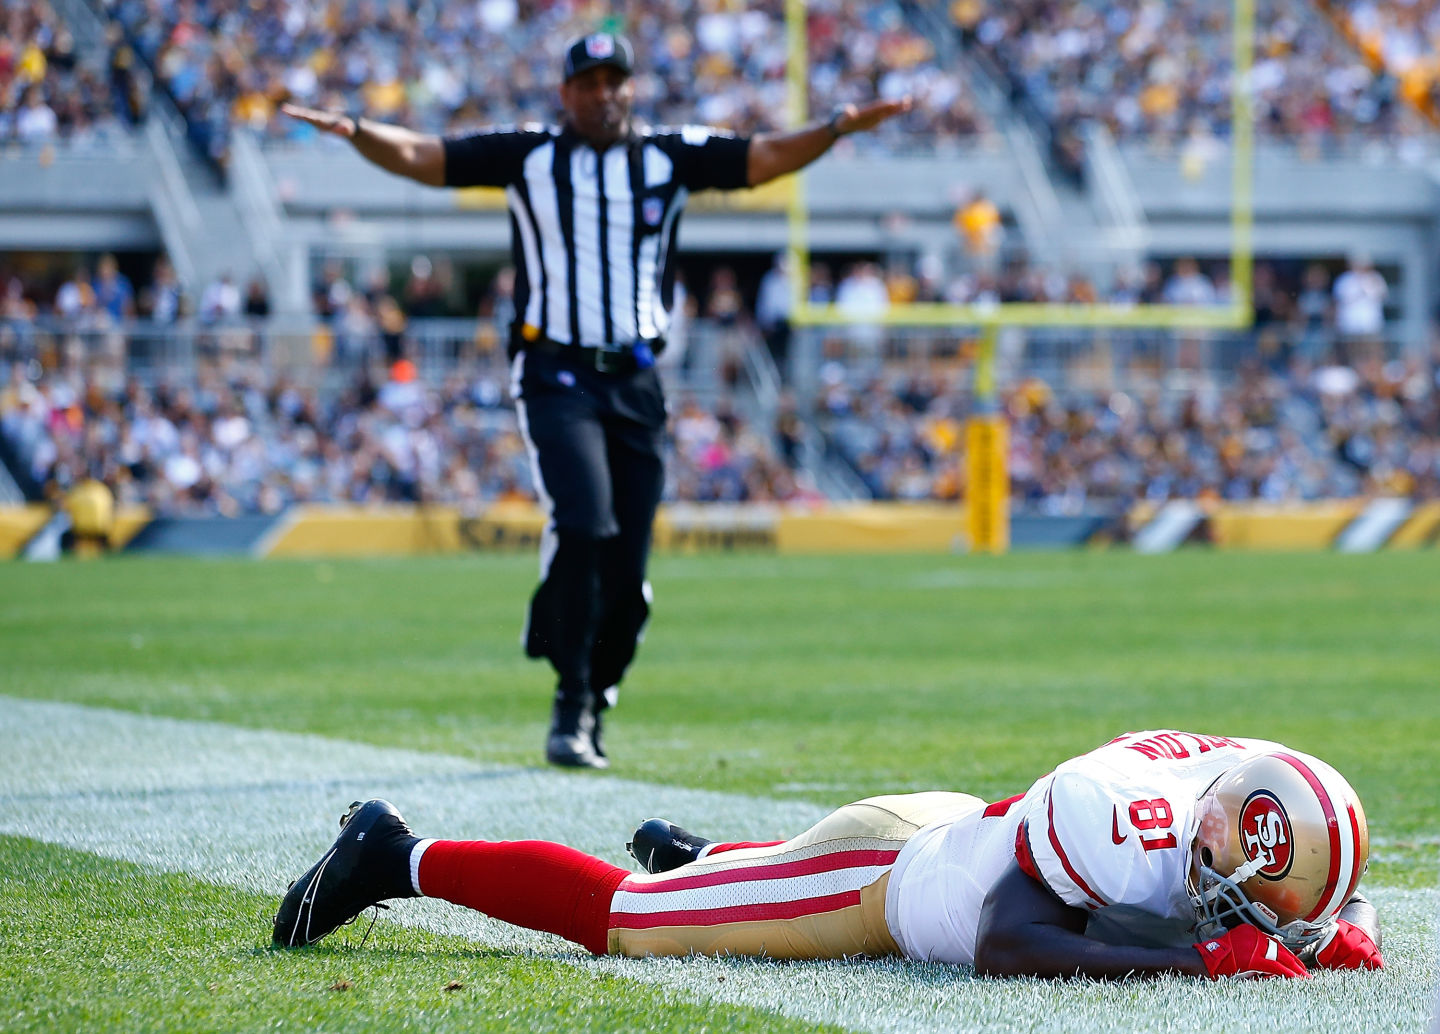 Anquan Boldin #81 of the San Francisco 49ers reacts following an incomplete pass in the third quarter against the Pittsburgh Steelers. (Jared Wickerham/Getty Images)